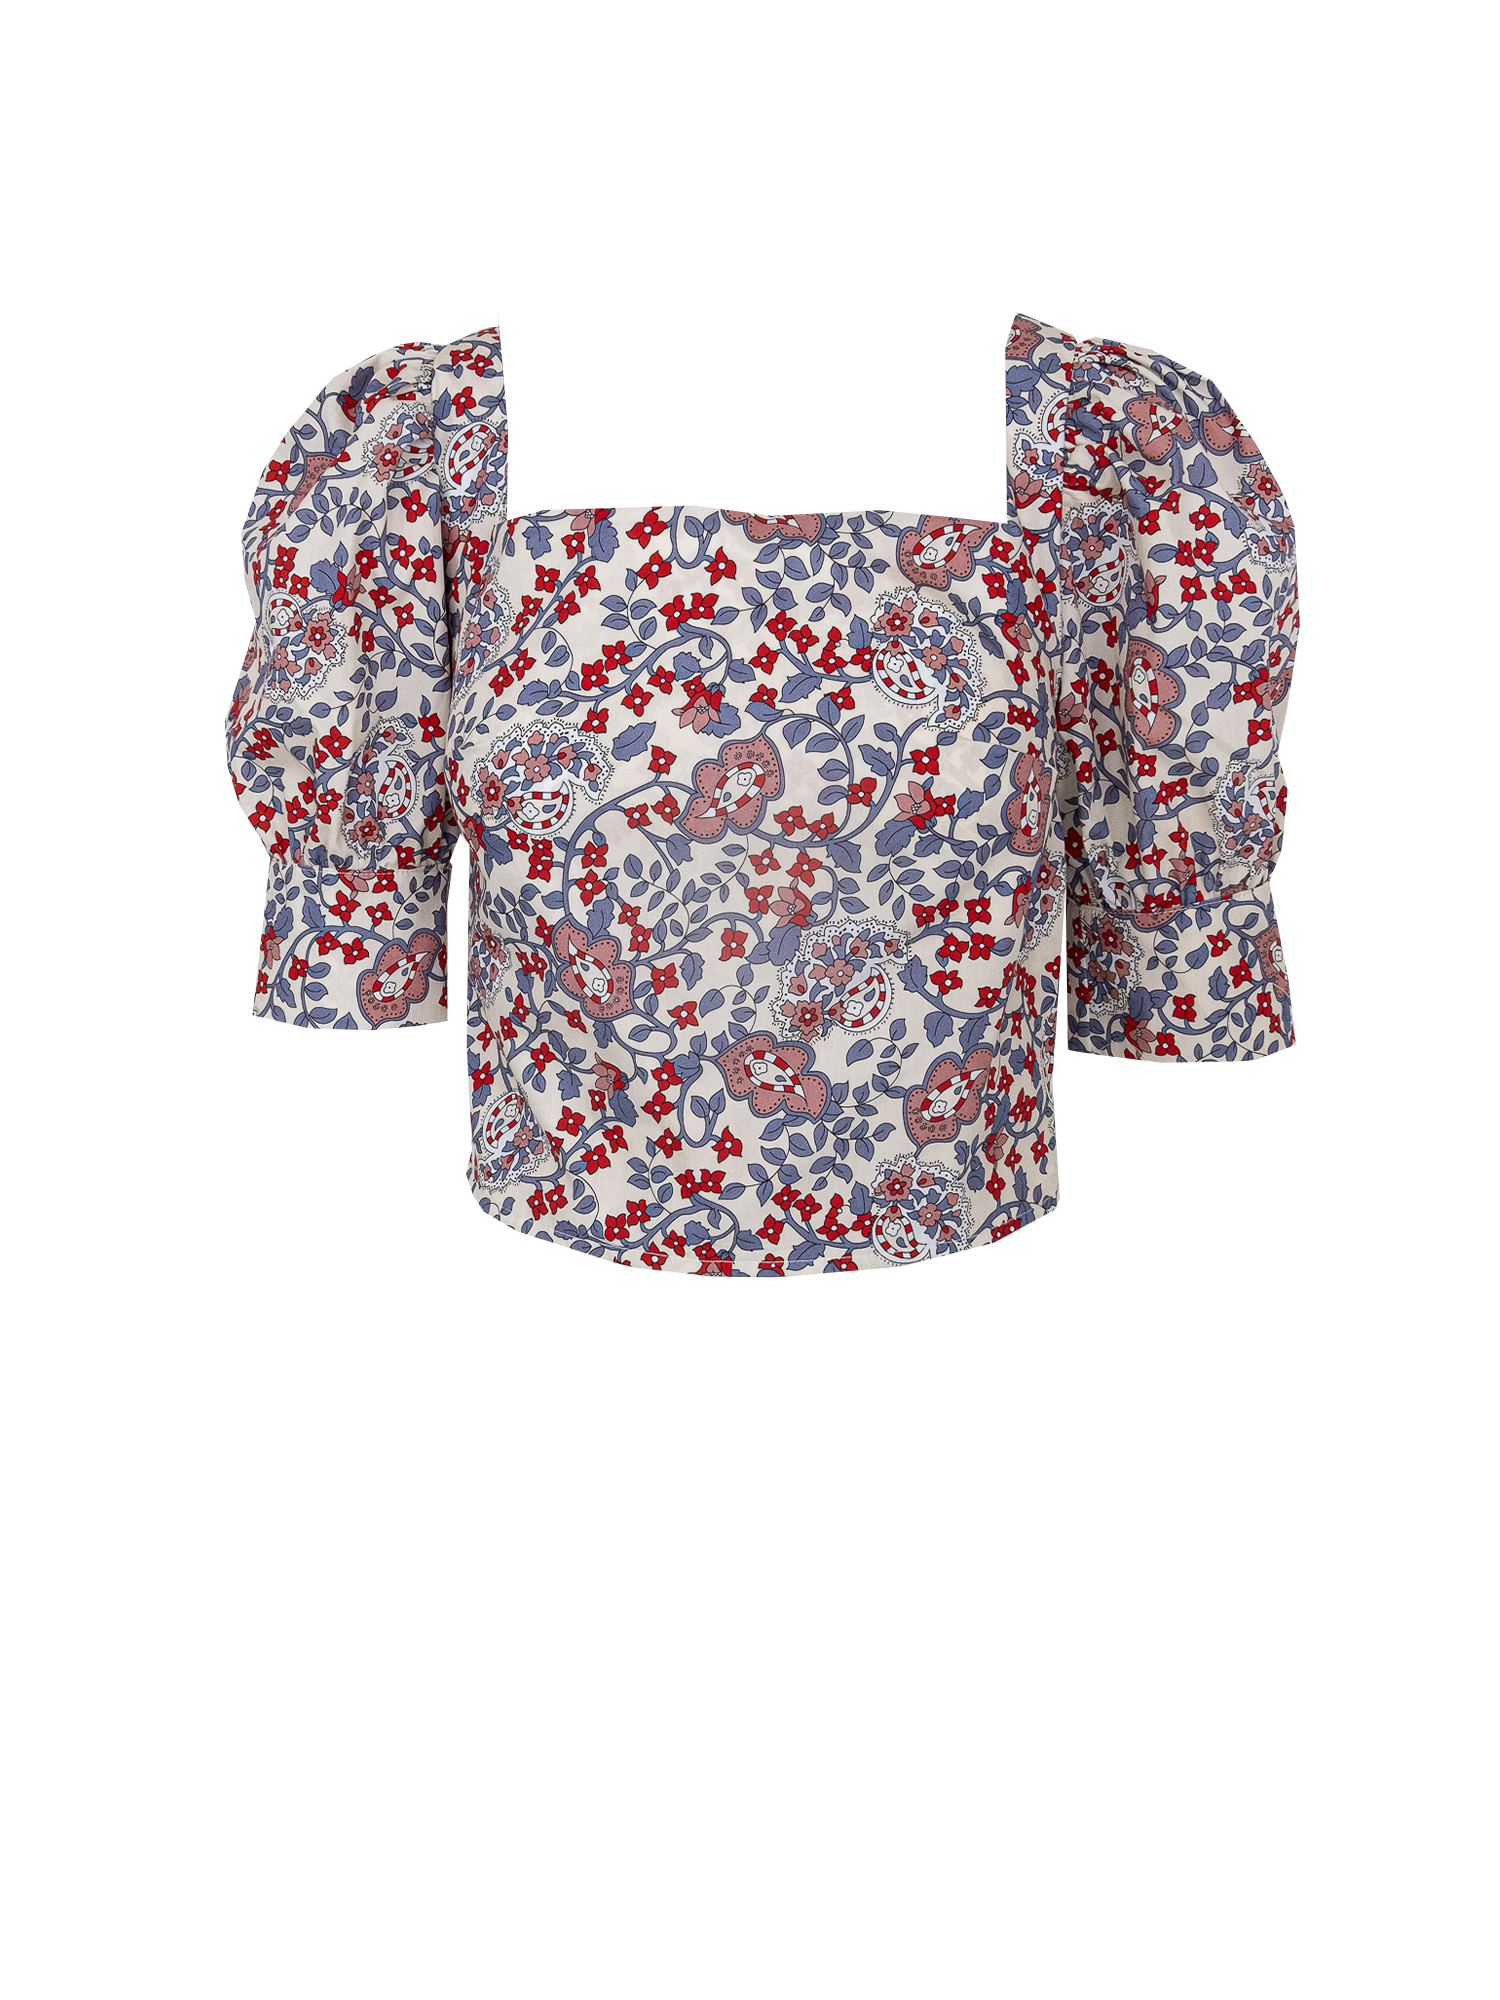 CAMELIA - square neck top  with puffball sleeves in cotton Kew print